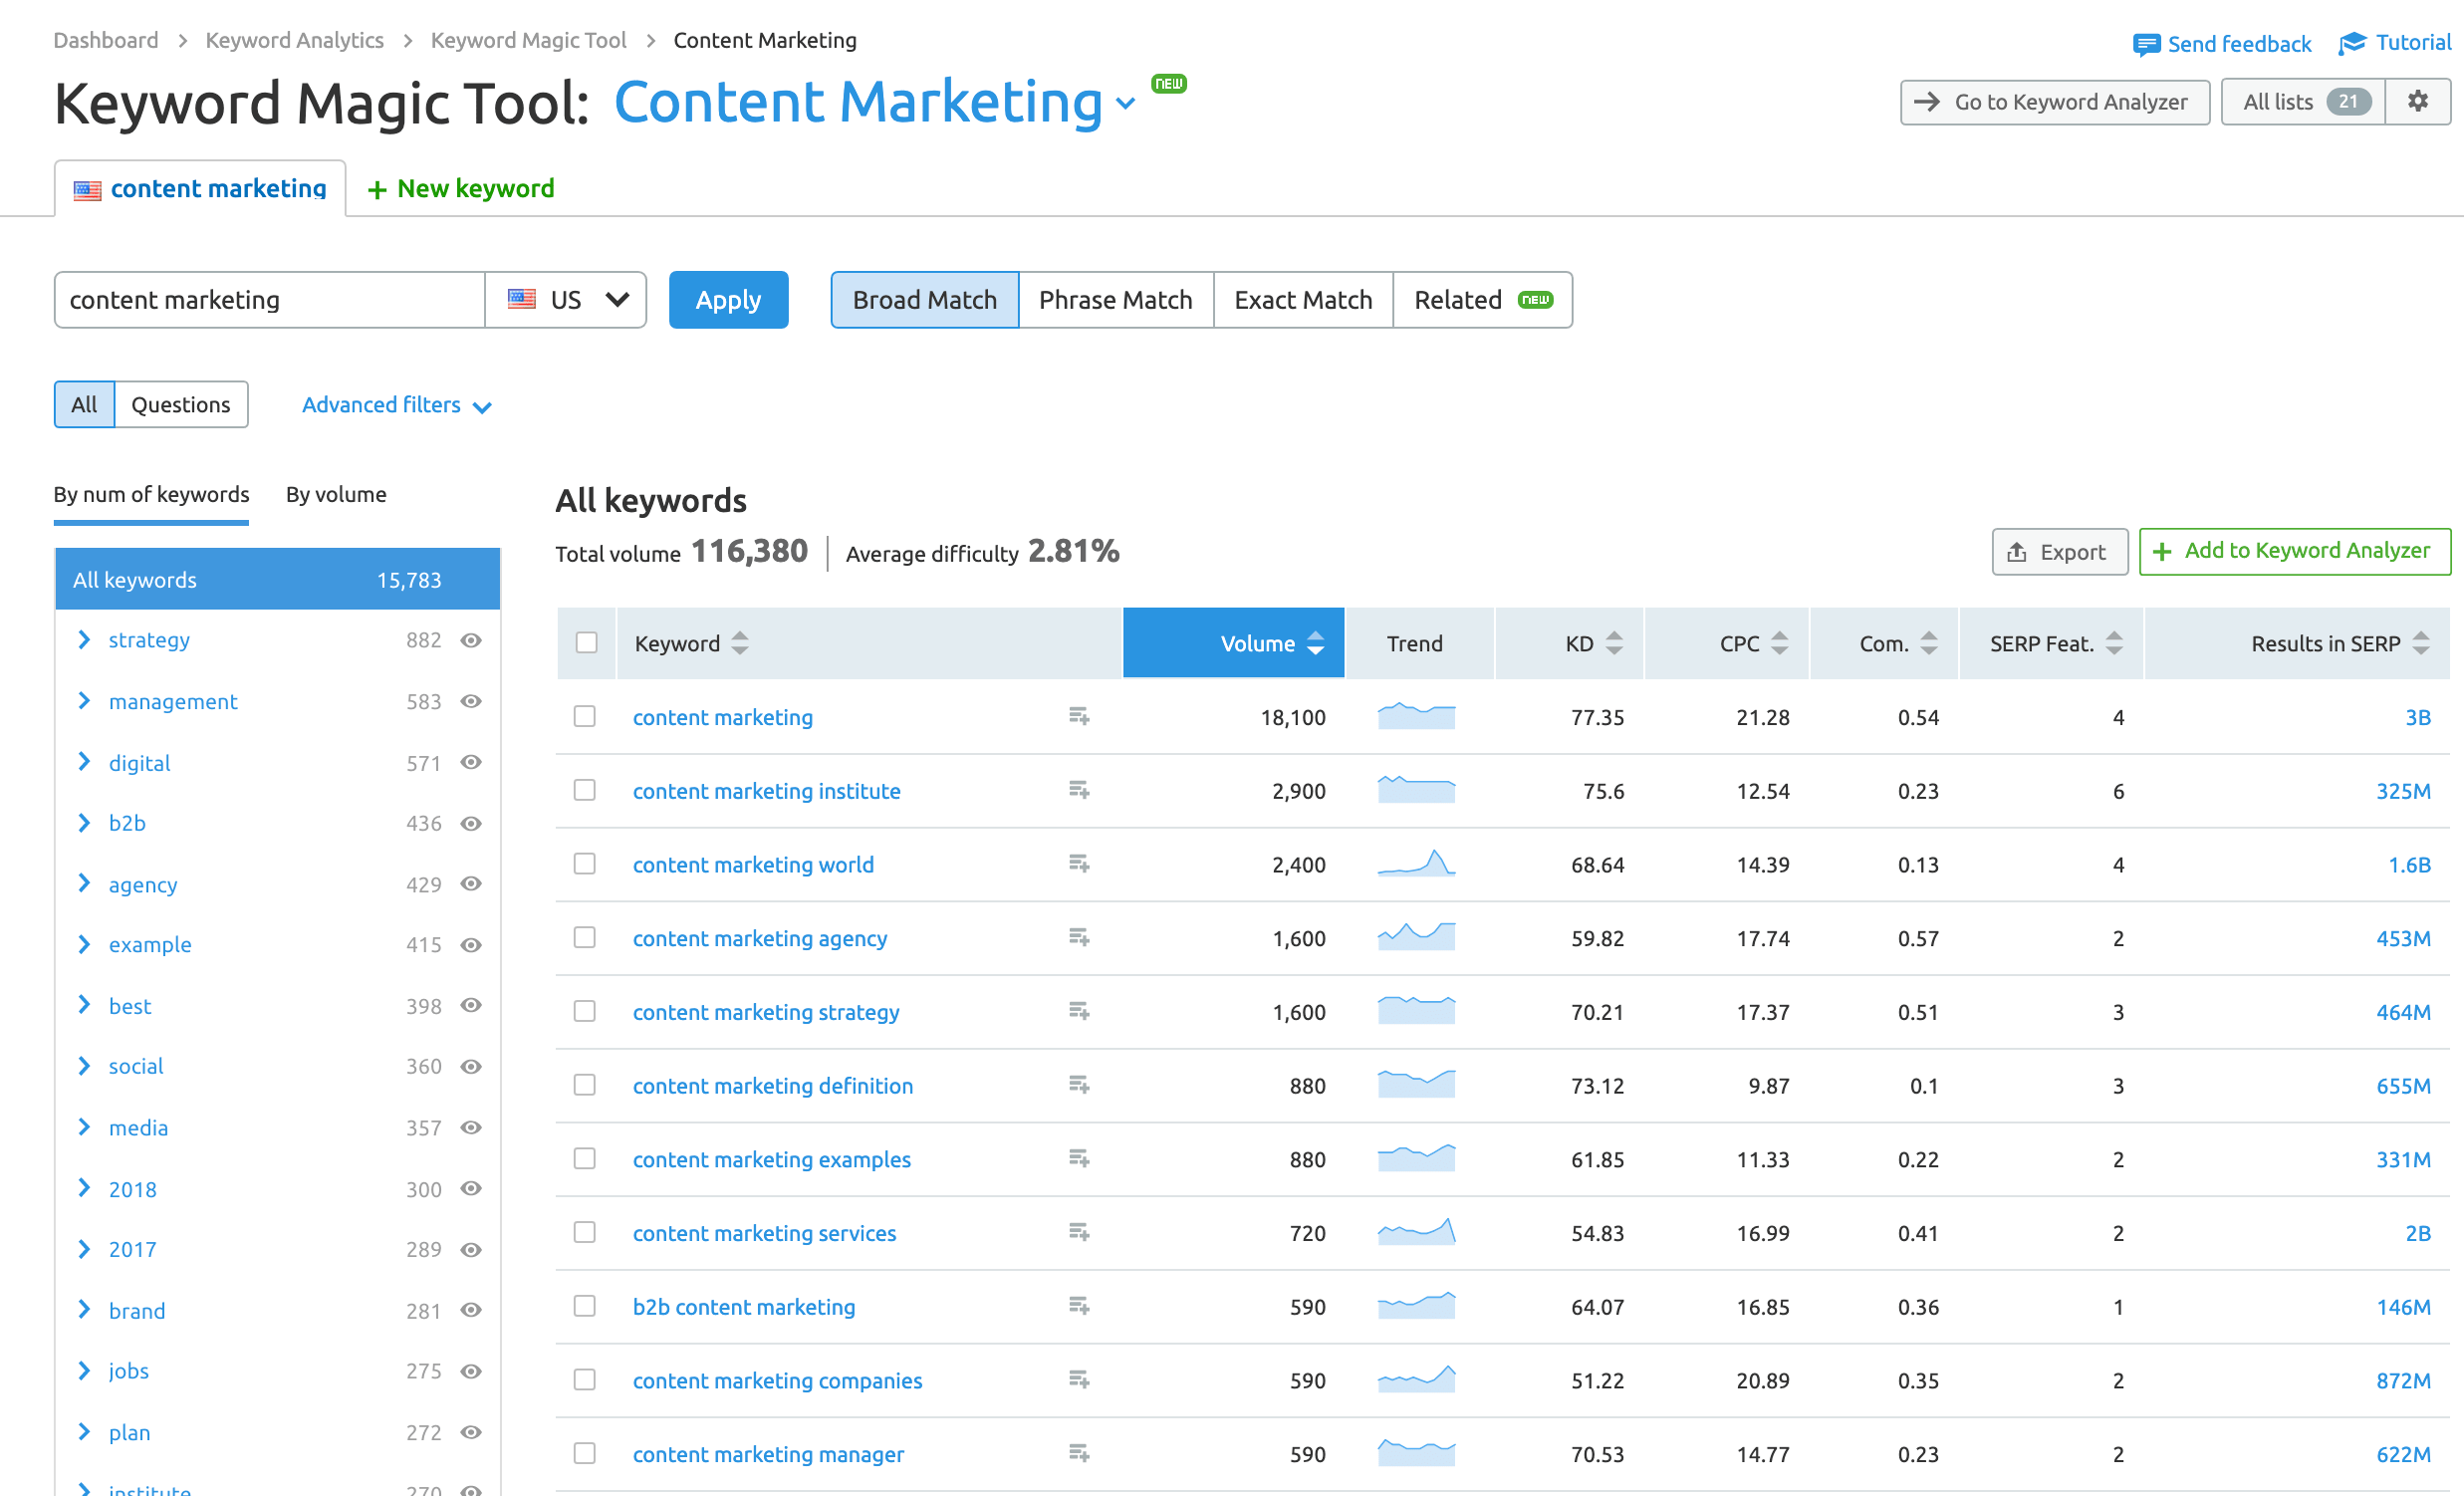 How Do I Find What Affected My Trust Score In Semrush?